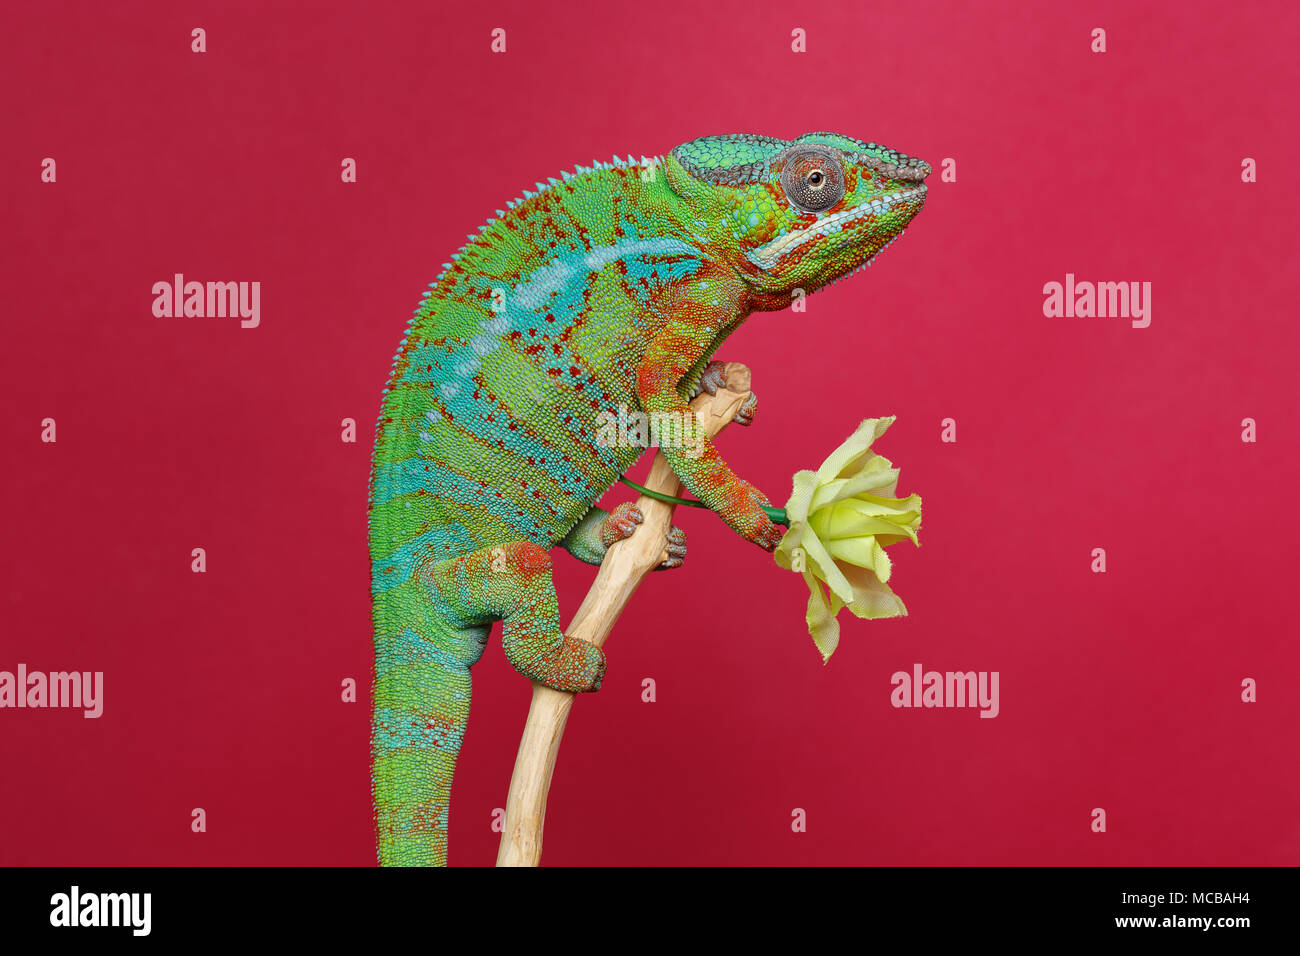 alive chameleon reptile sitting on branch holding flower. studio shot over red background. copy space. Stock Photo